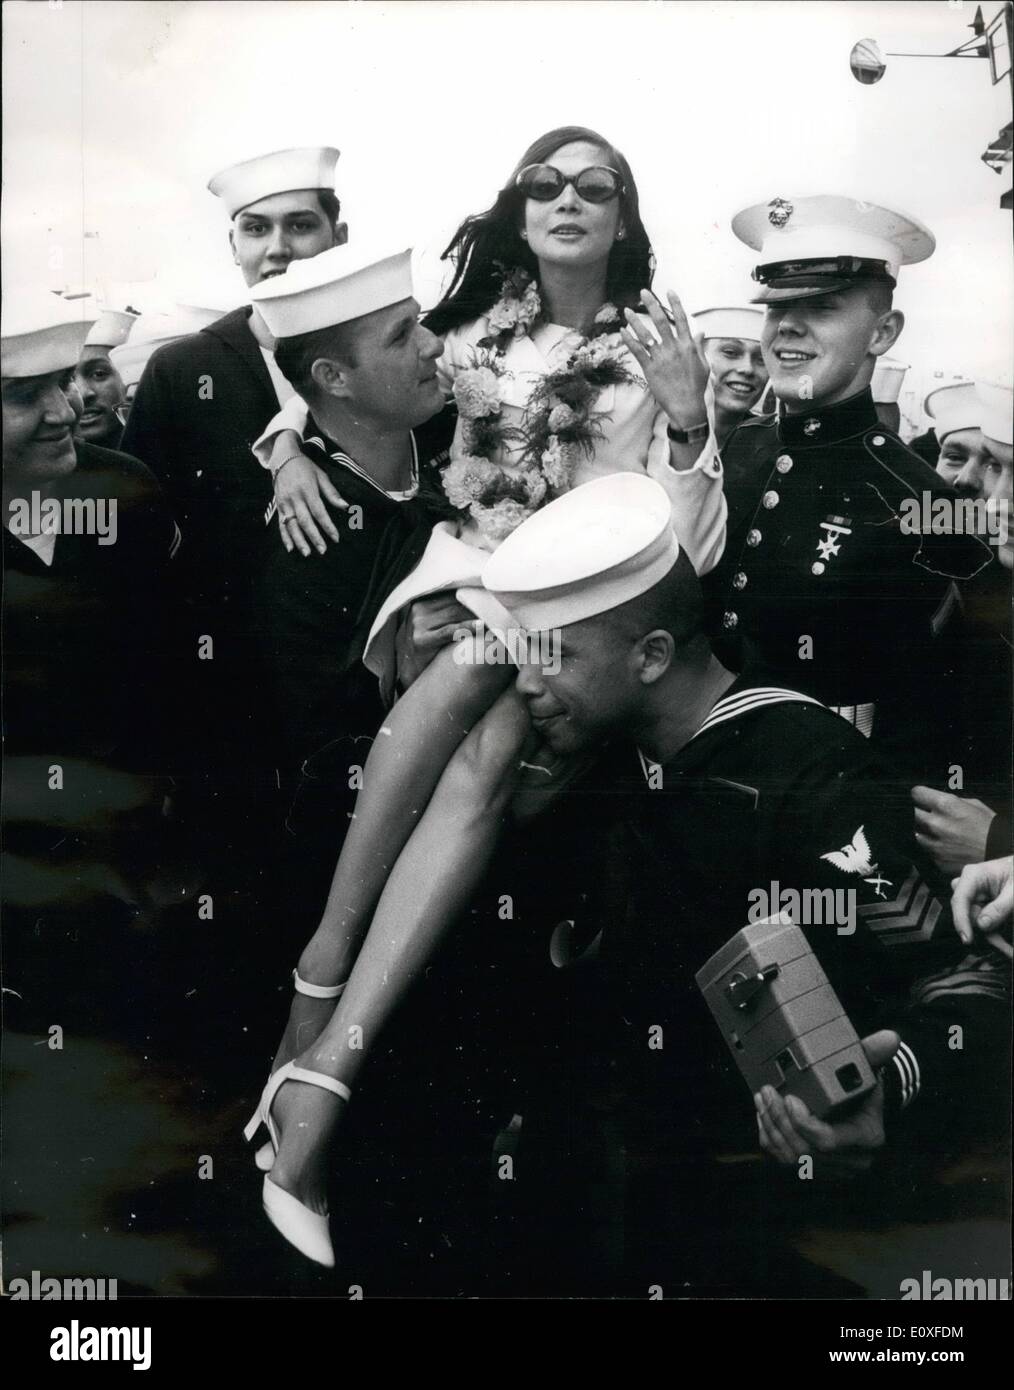 Aug. 08, 1966 - Nancy Kwan is ship's Mascot: Down at south railway jetty in Portsmouth yesterday, yesterday, 2,800 American sailors were on duty entertaining their new 'mascot', actress Nancy Kwan. On board the USS Randolph, there was an Hawaiian band playing at full steam, and grass - skirted girls. And there were garlands of pink and gold chrysanthemums, bought for 30s. each from a local florist, for guests. Miss Kwan managed to sign a, ing-size picture of herself, accept a plaque and an engraved lighter, and thank the crew for making her their mascot Stock Photo